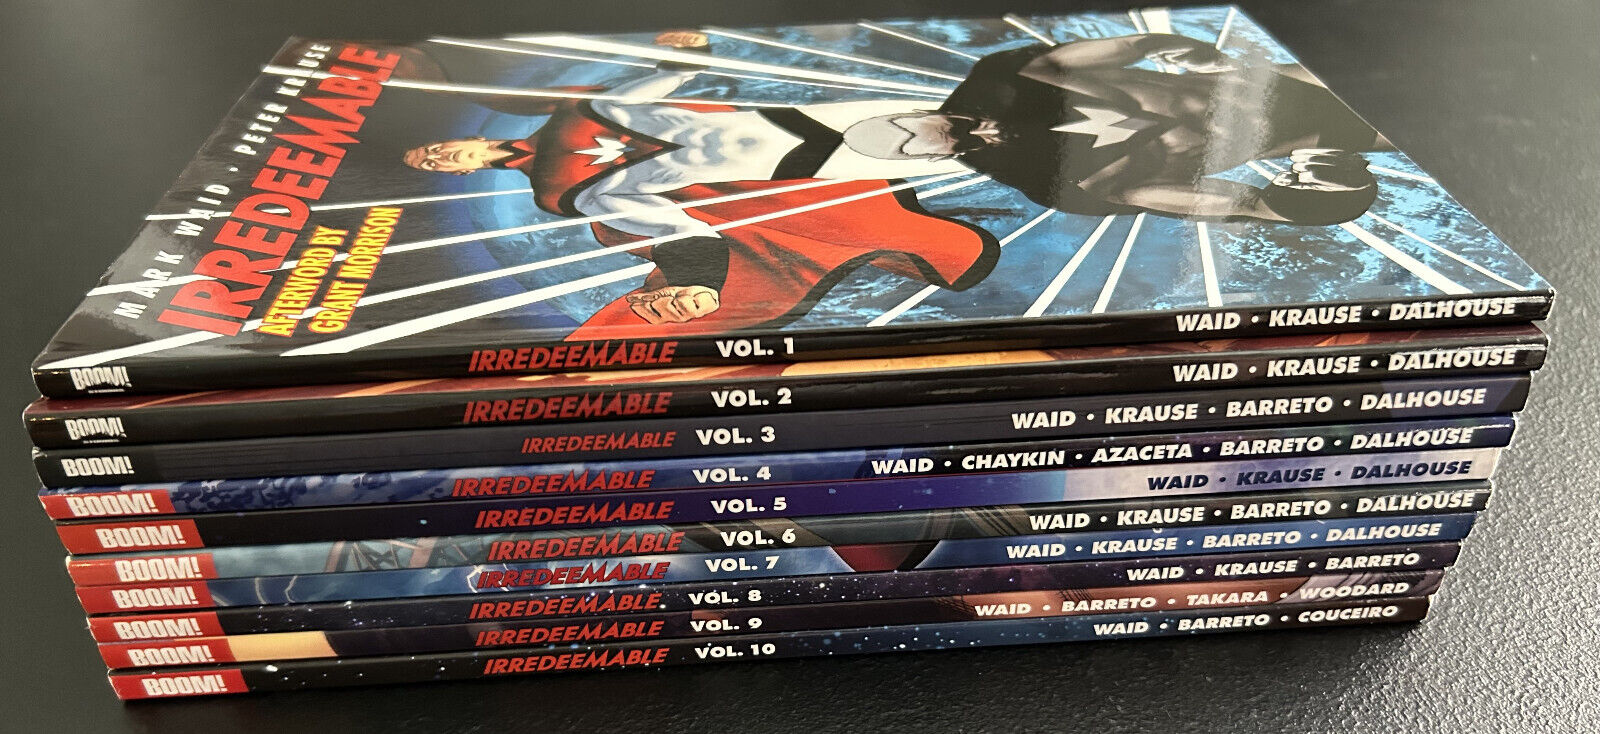 Irredeemable Trade Paperback TPB Complete 10 Book Lot Mark Waid VOL 1-10